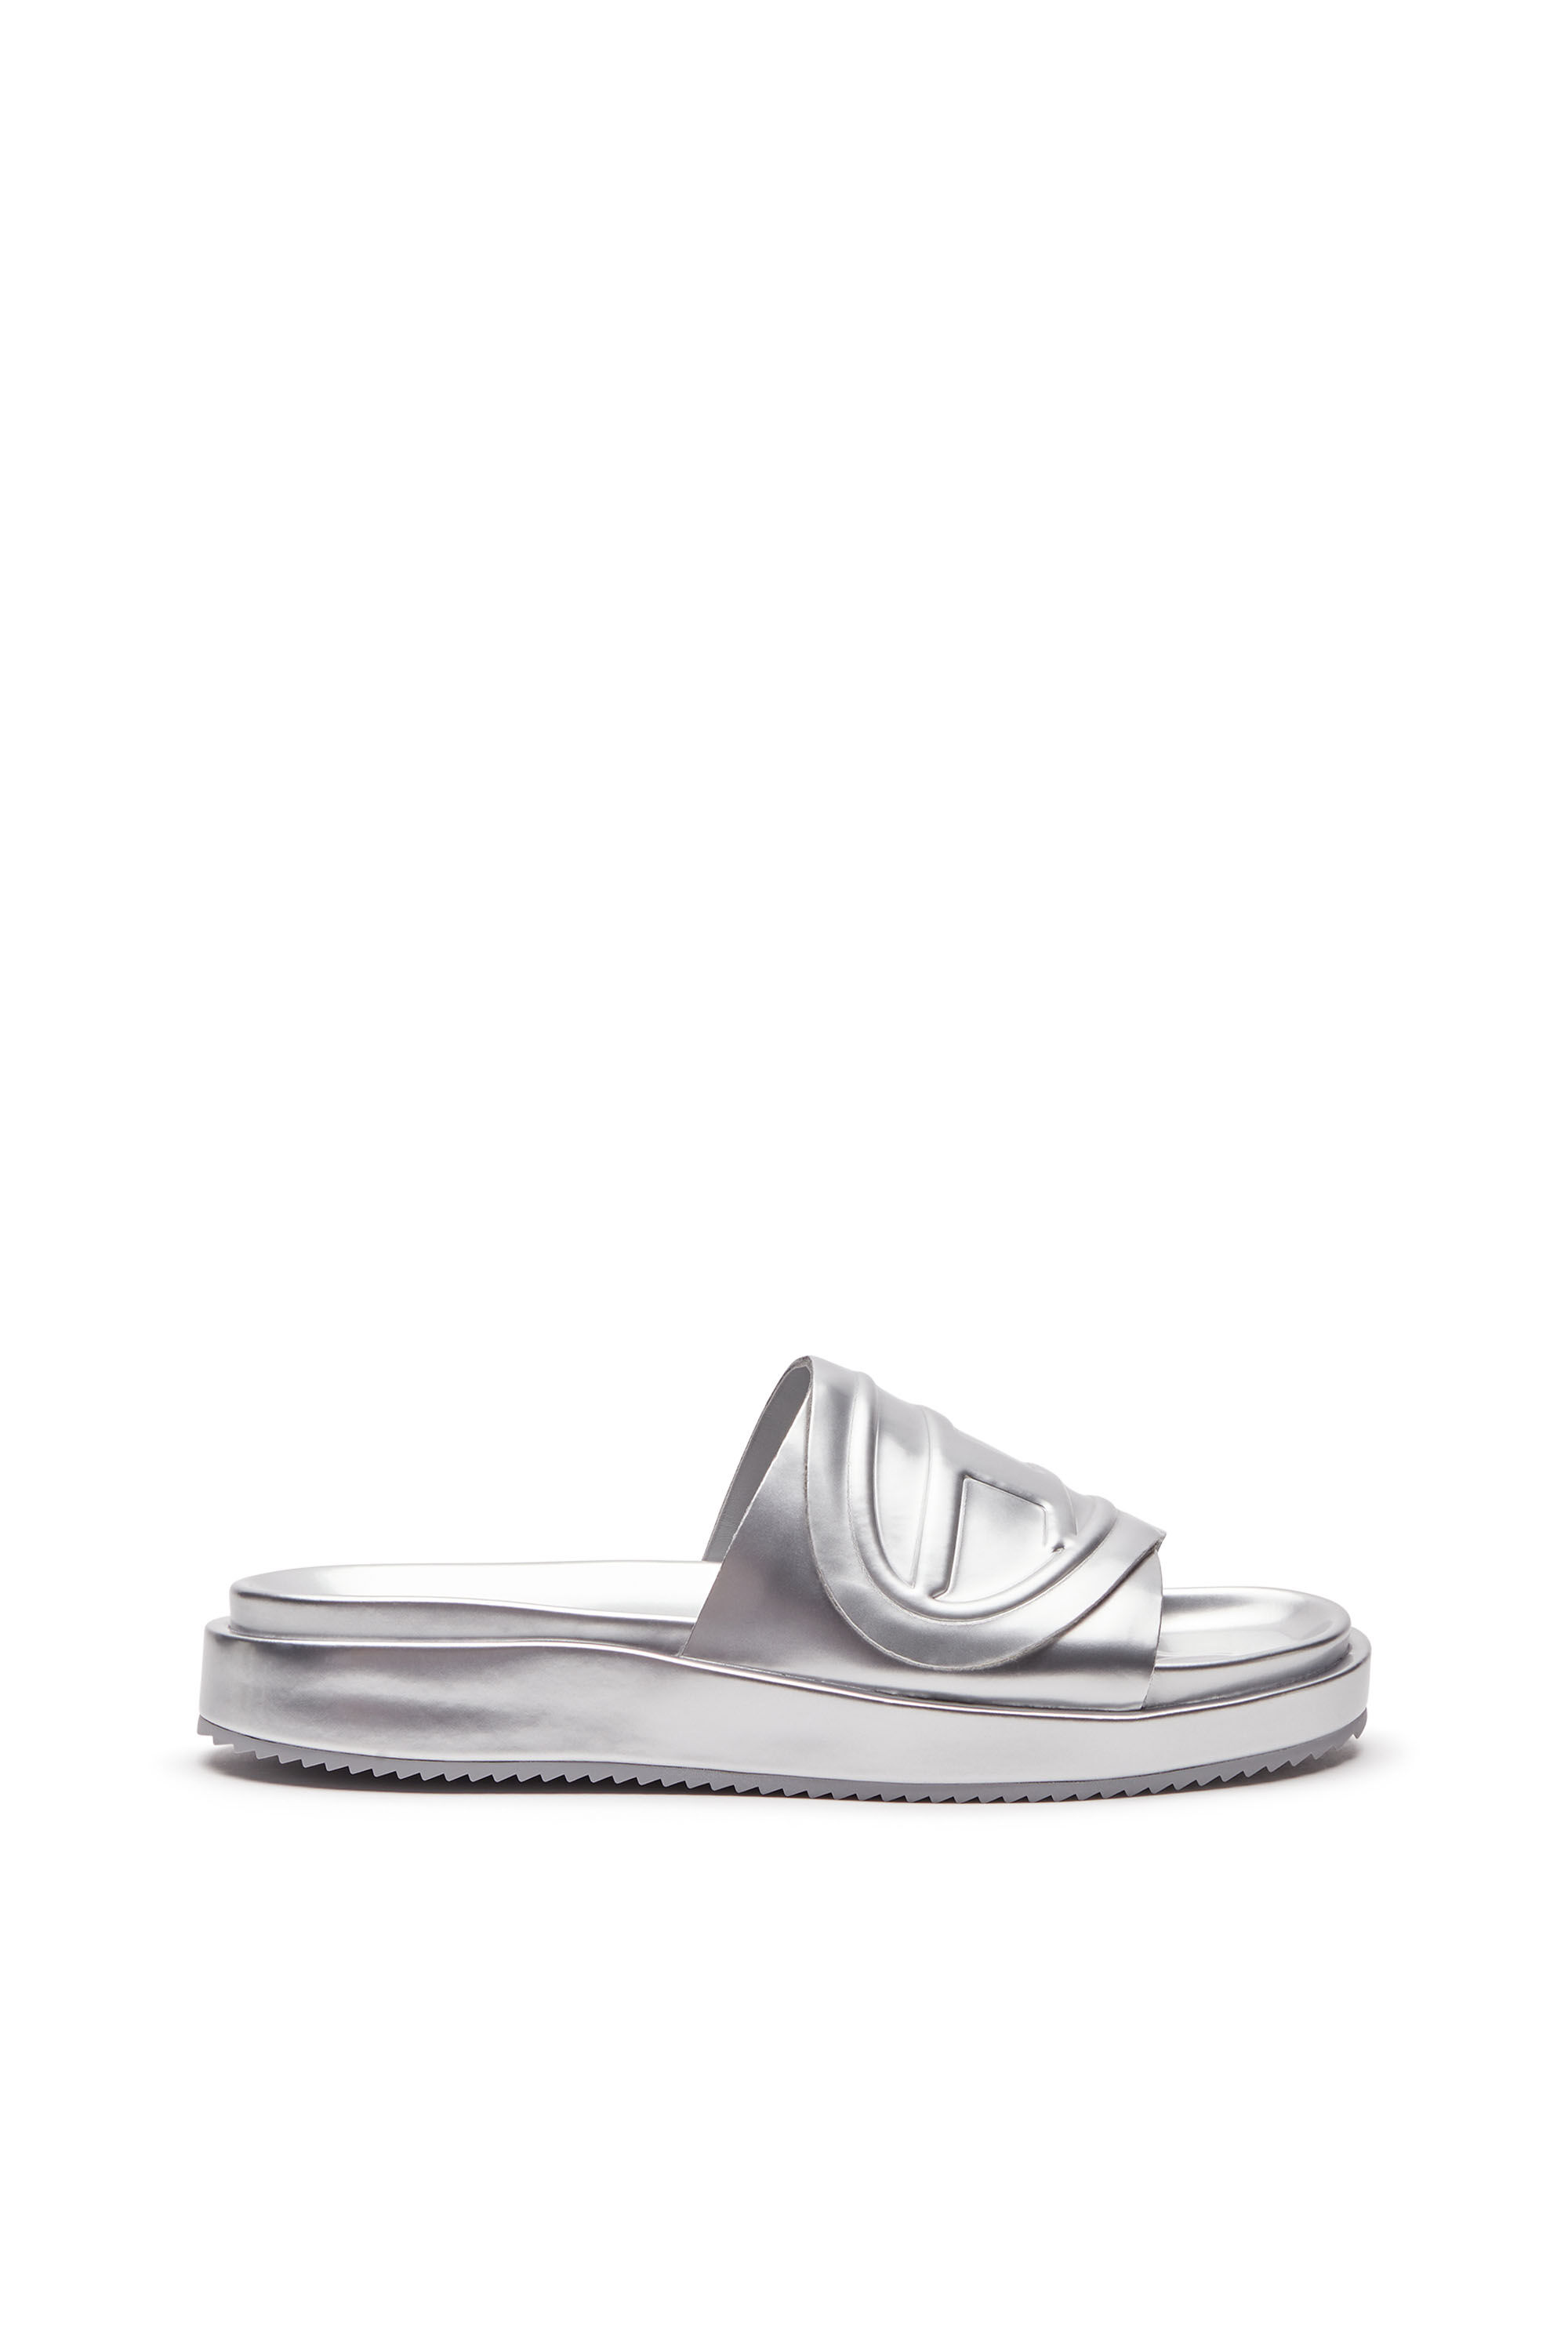 Diesel - SA-SLIDE D OVAL W, Woman Sa-Slide D-Metallic slide sandals with Oval D strap in Silver - Image 1